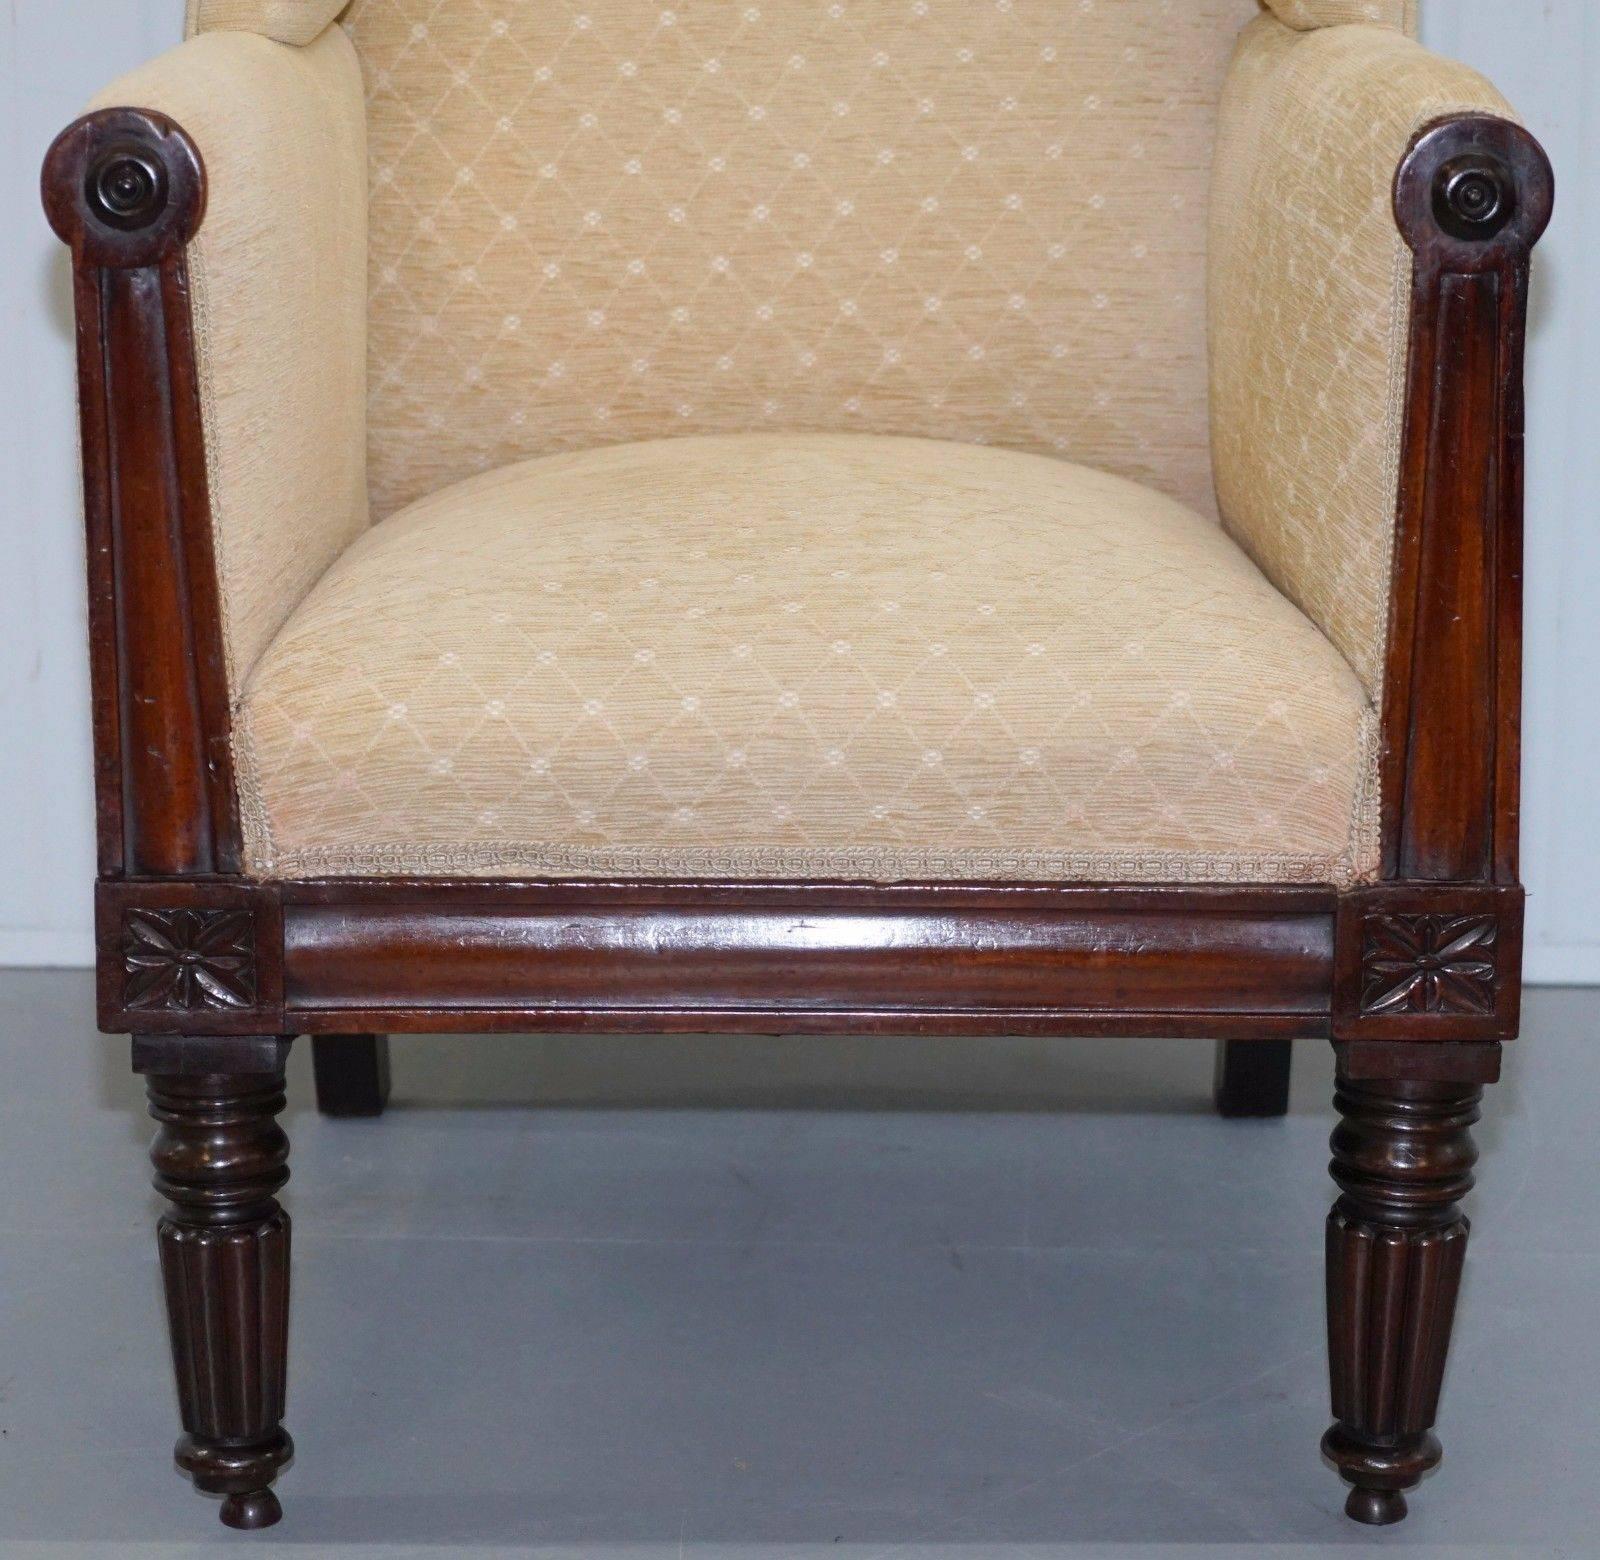 Late 18th Century Rare circa 1790 Gillows Style Porters Chair Mahogany Framed Wingback Rare Find